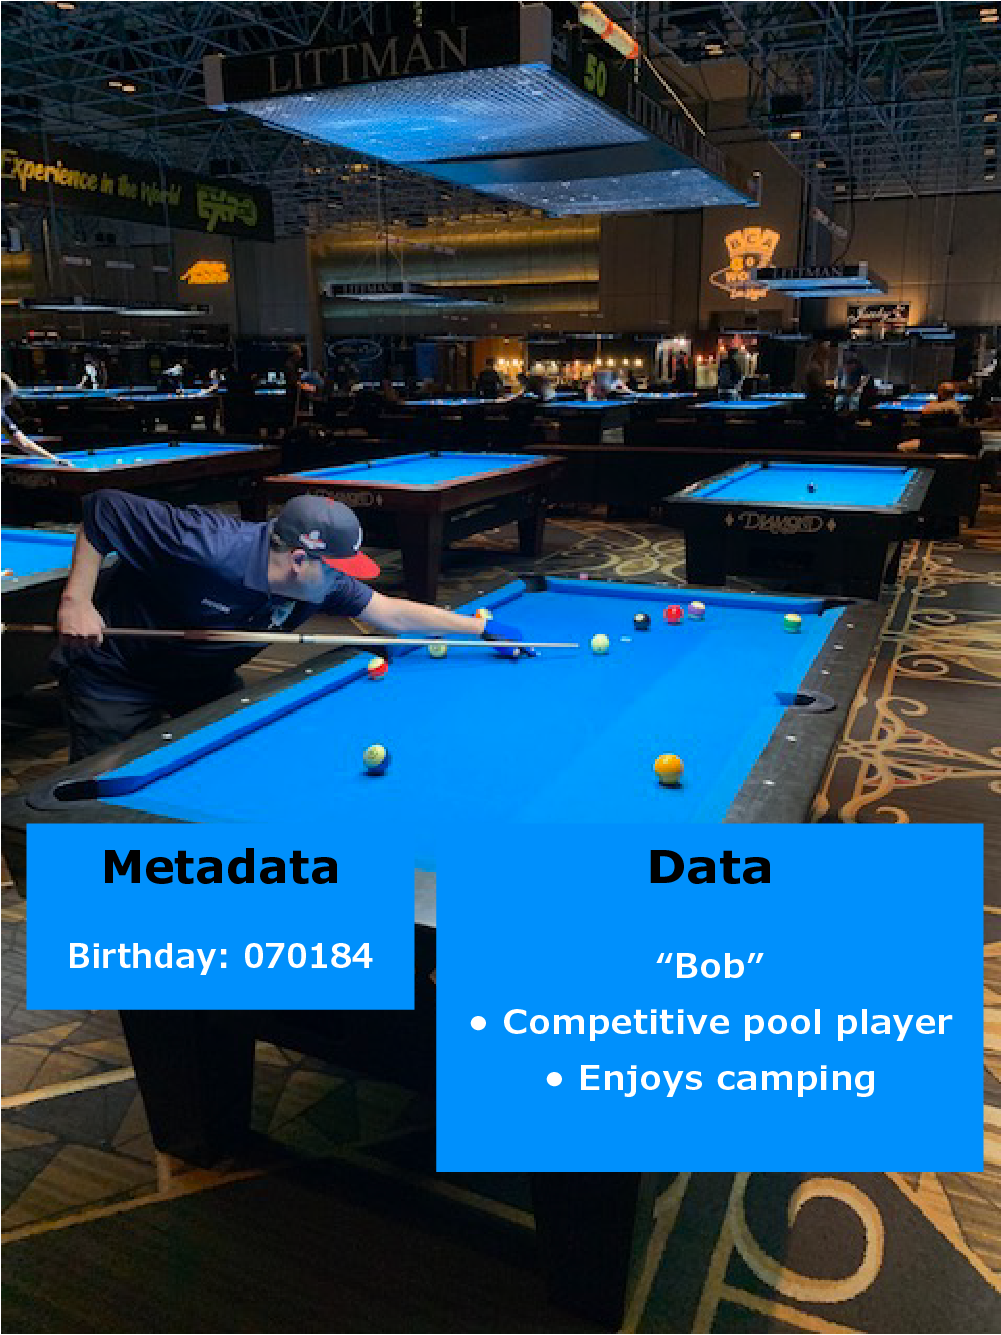 A man leans over a pool table playing pool. Metadata and data are depicted in the photo illustration. Metadata: birthday; Data: "Bob"; competitive pool player and enjoys camping.